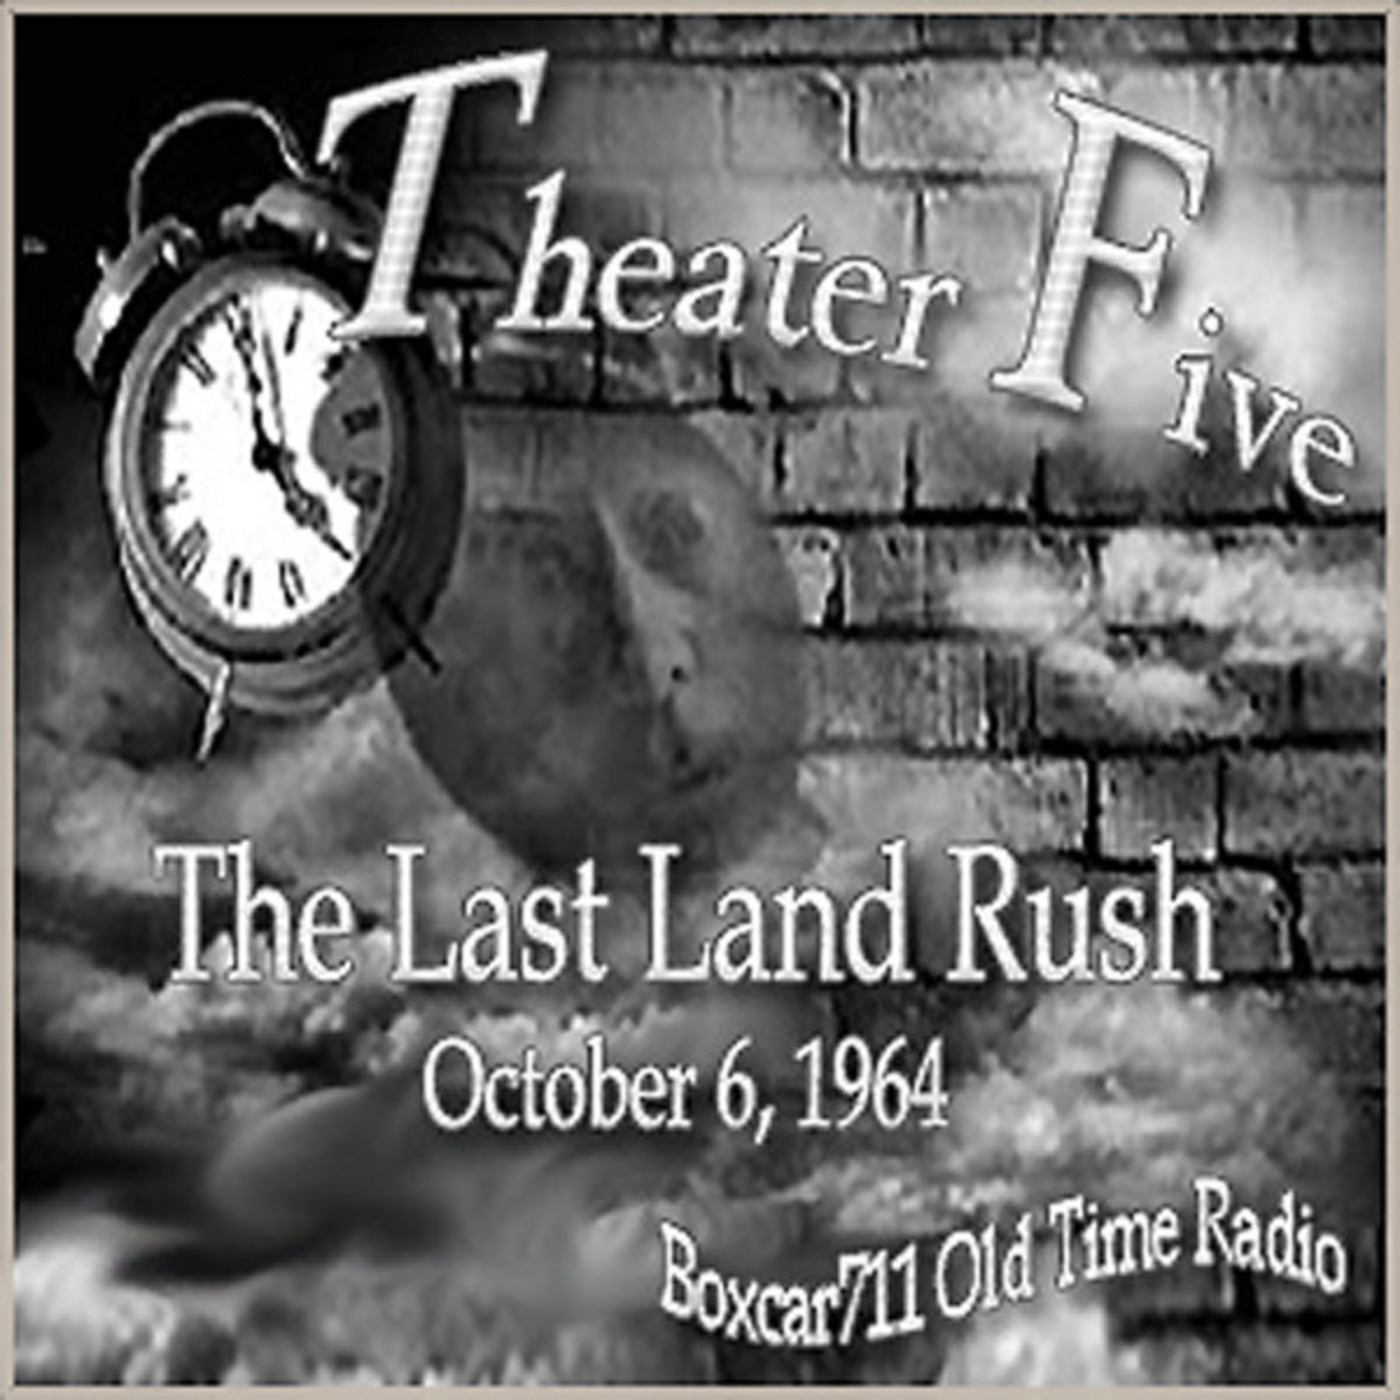 Episode 9504: Theater Five - 